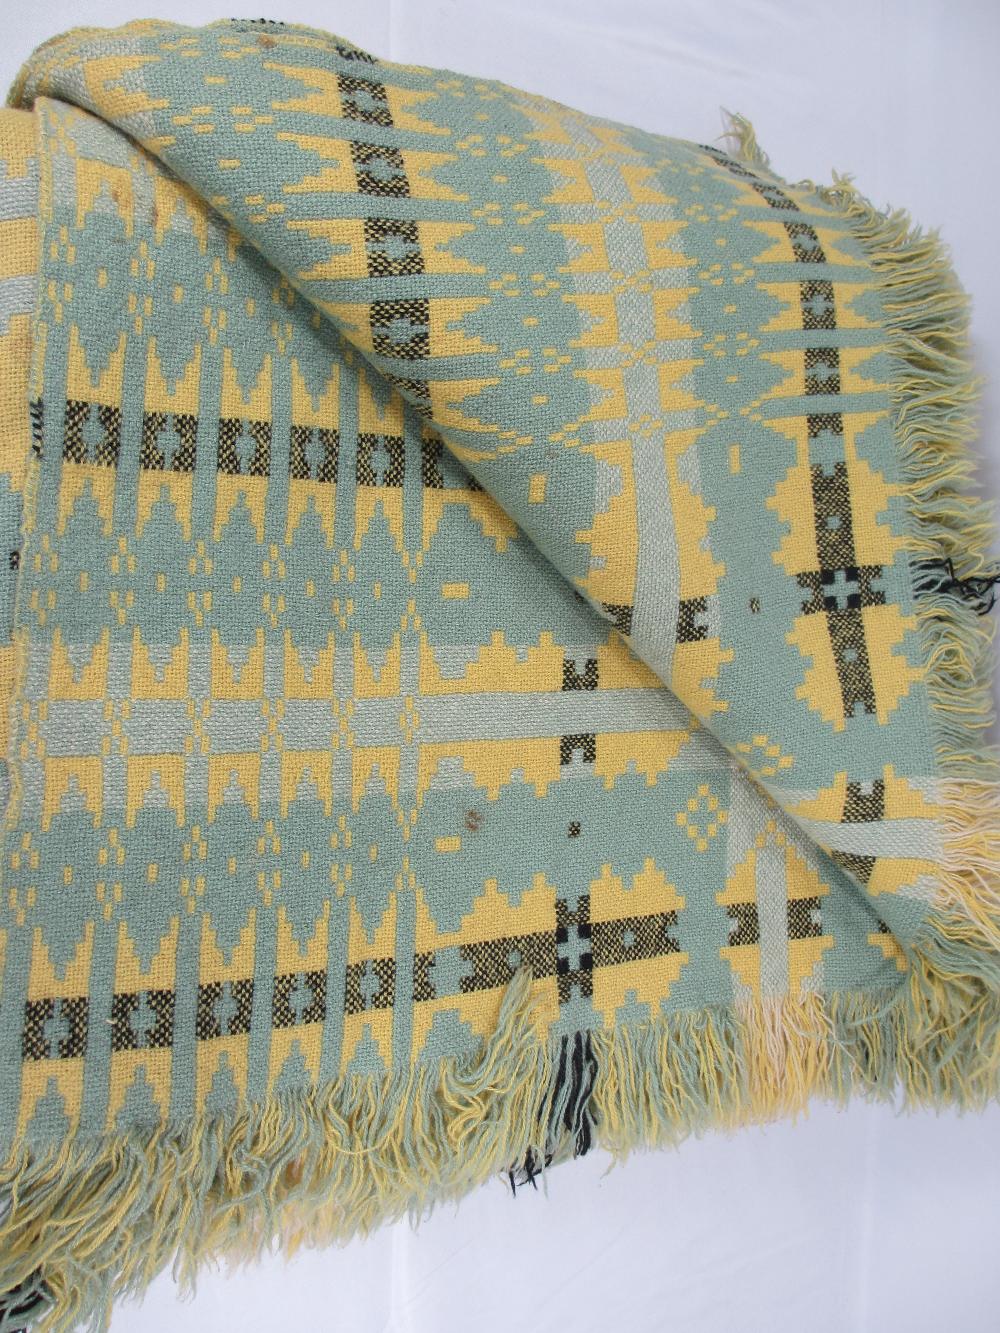 TRADITIONAL WELSH WOOLLEN BLANKET - ground yellow with greens and black, tasselled ends, 207 x - Image 2 of 2